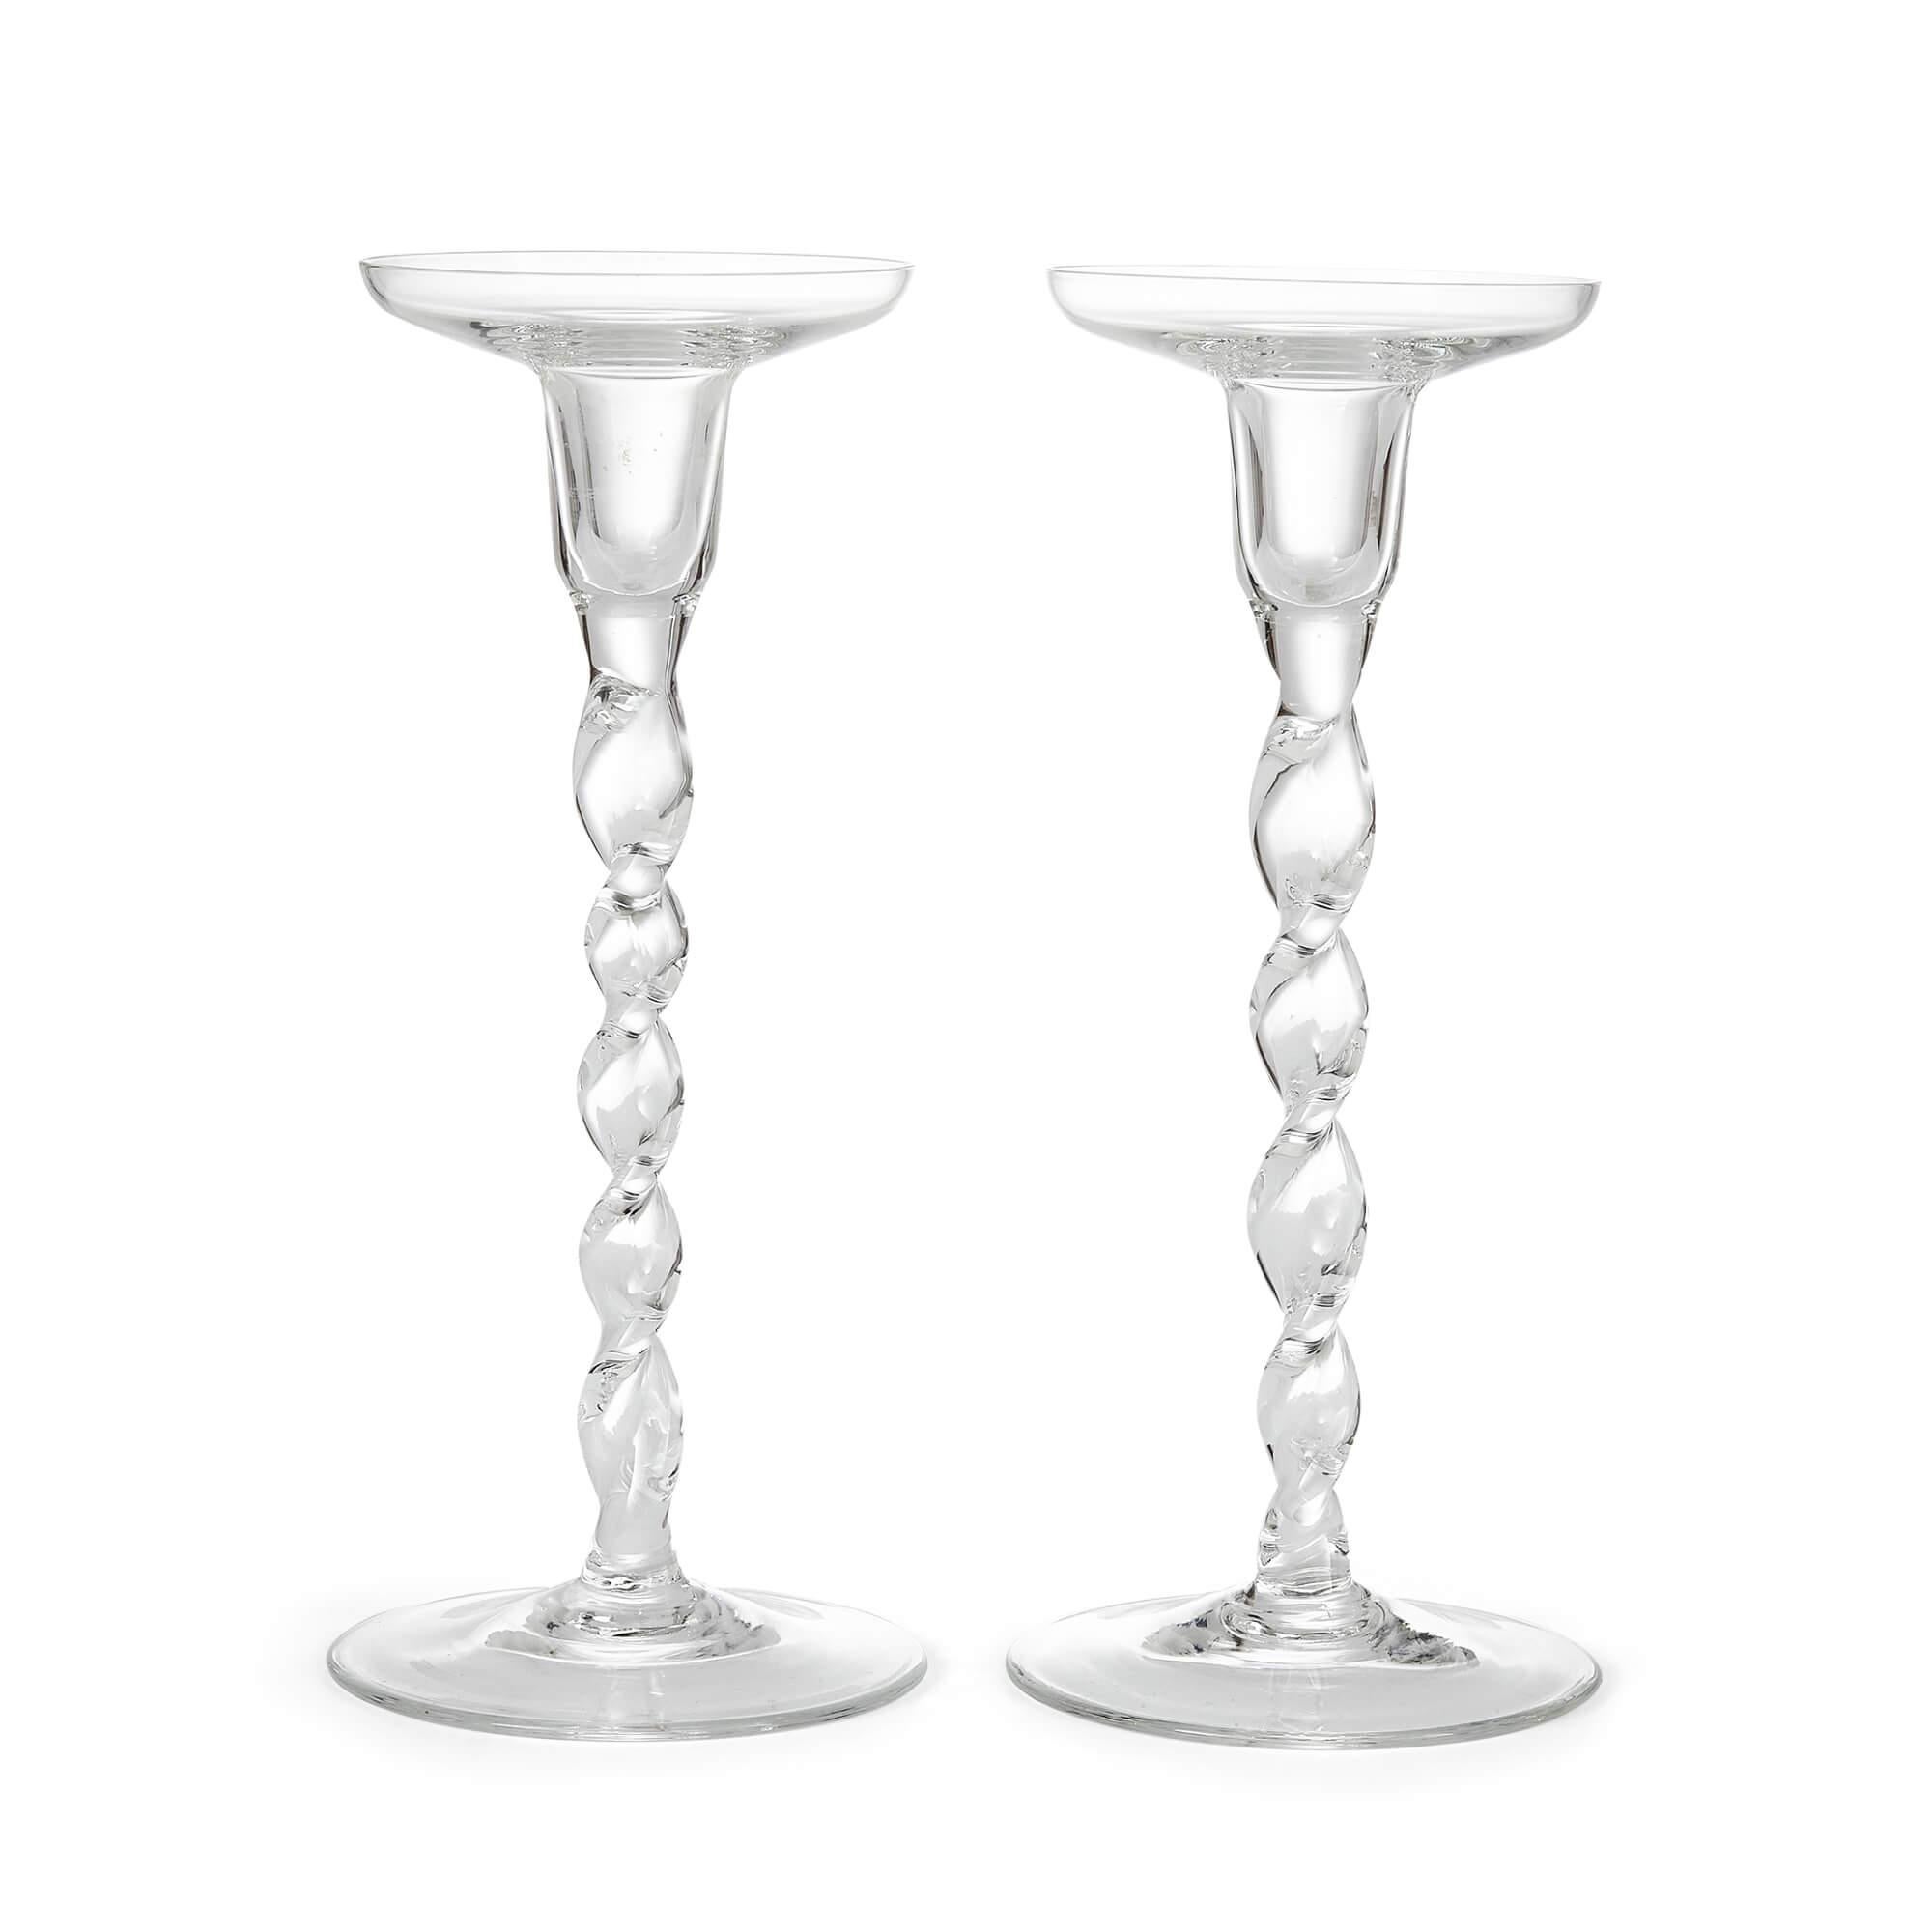 Pair of English glass spiral-twisted candlesticks
English, early 20th century
Measures: height 25cm, diameter 11cm

Made in England in the early part of the twentieth century, these elegant glass candlesticks stand out for their beautifully